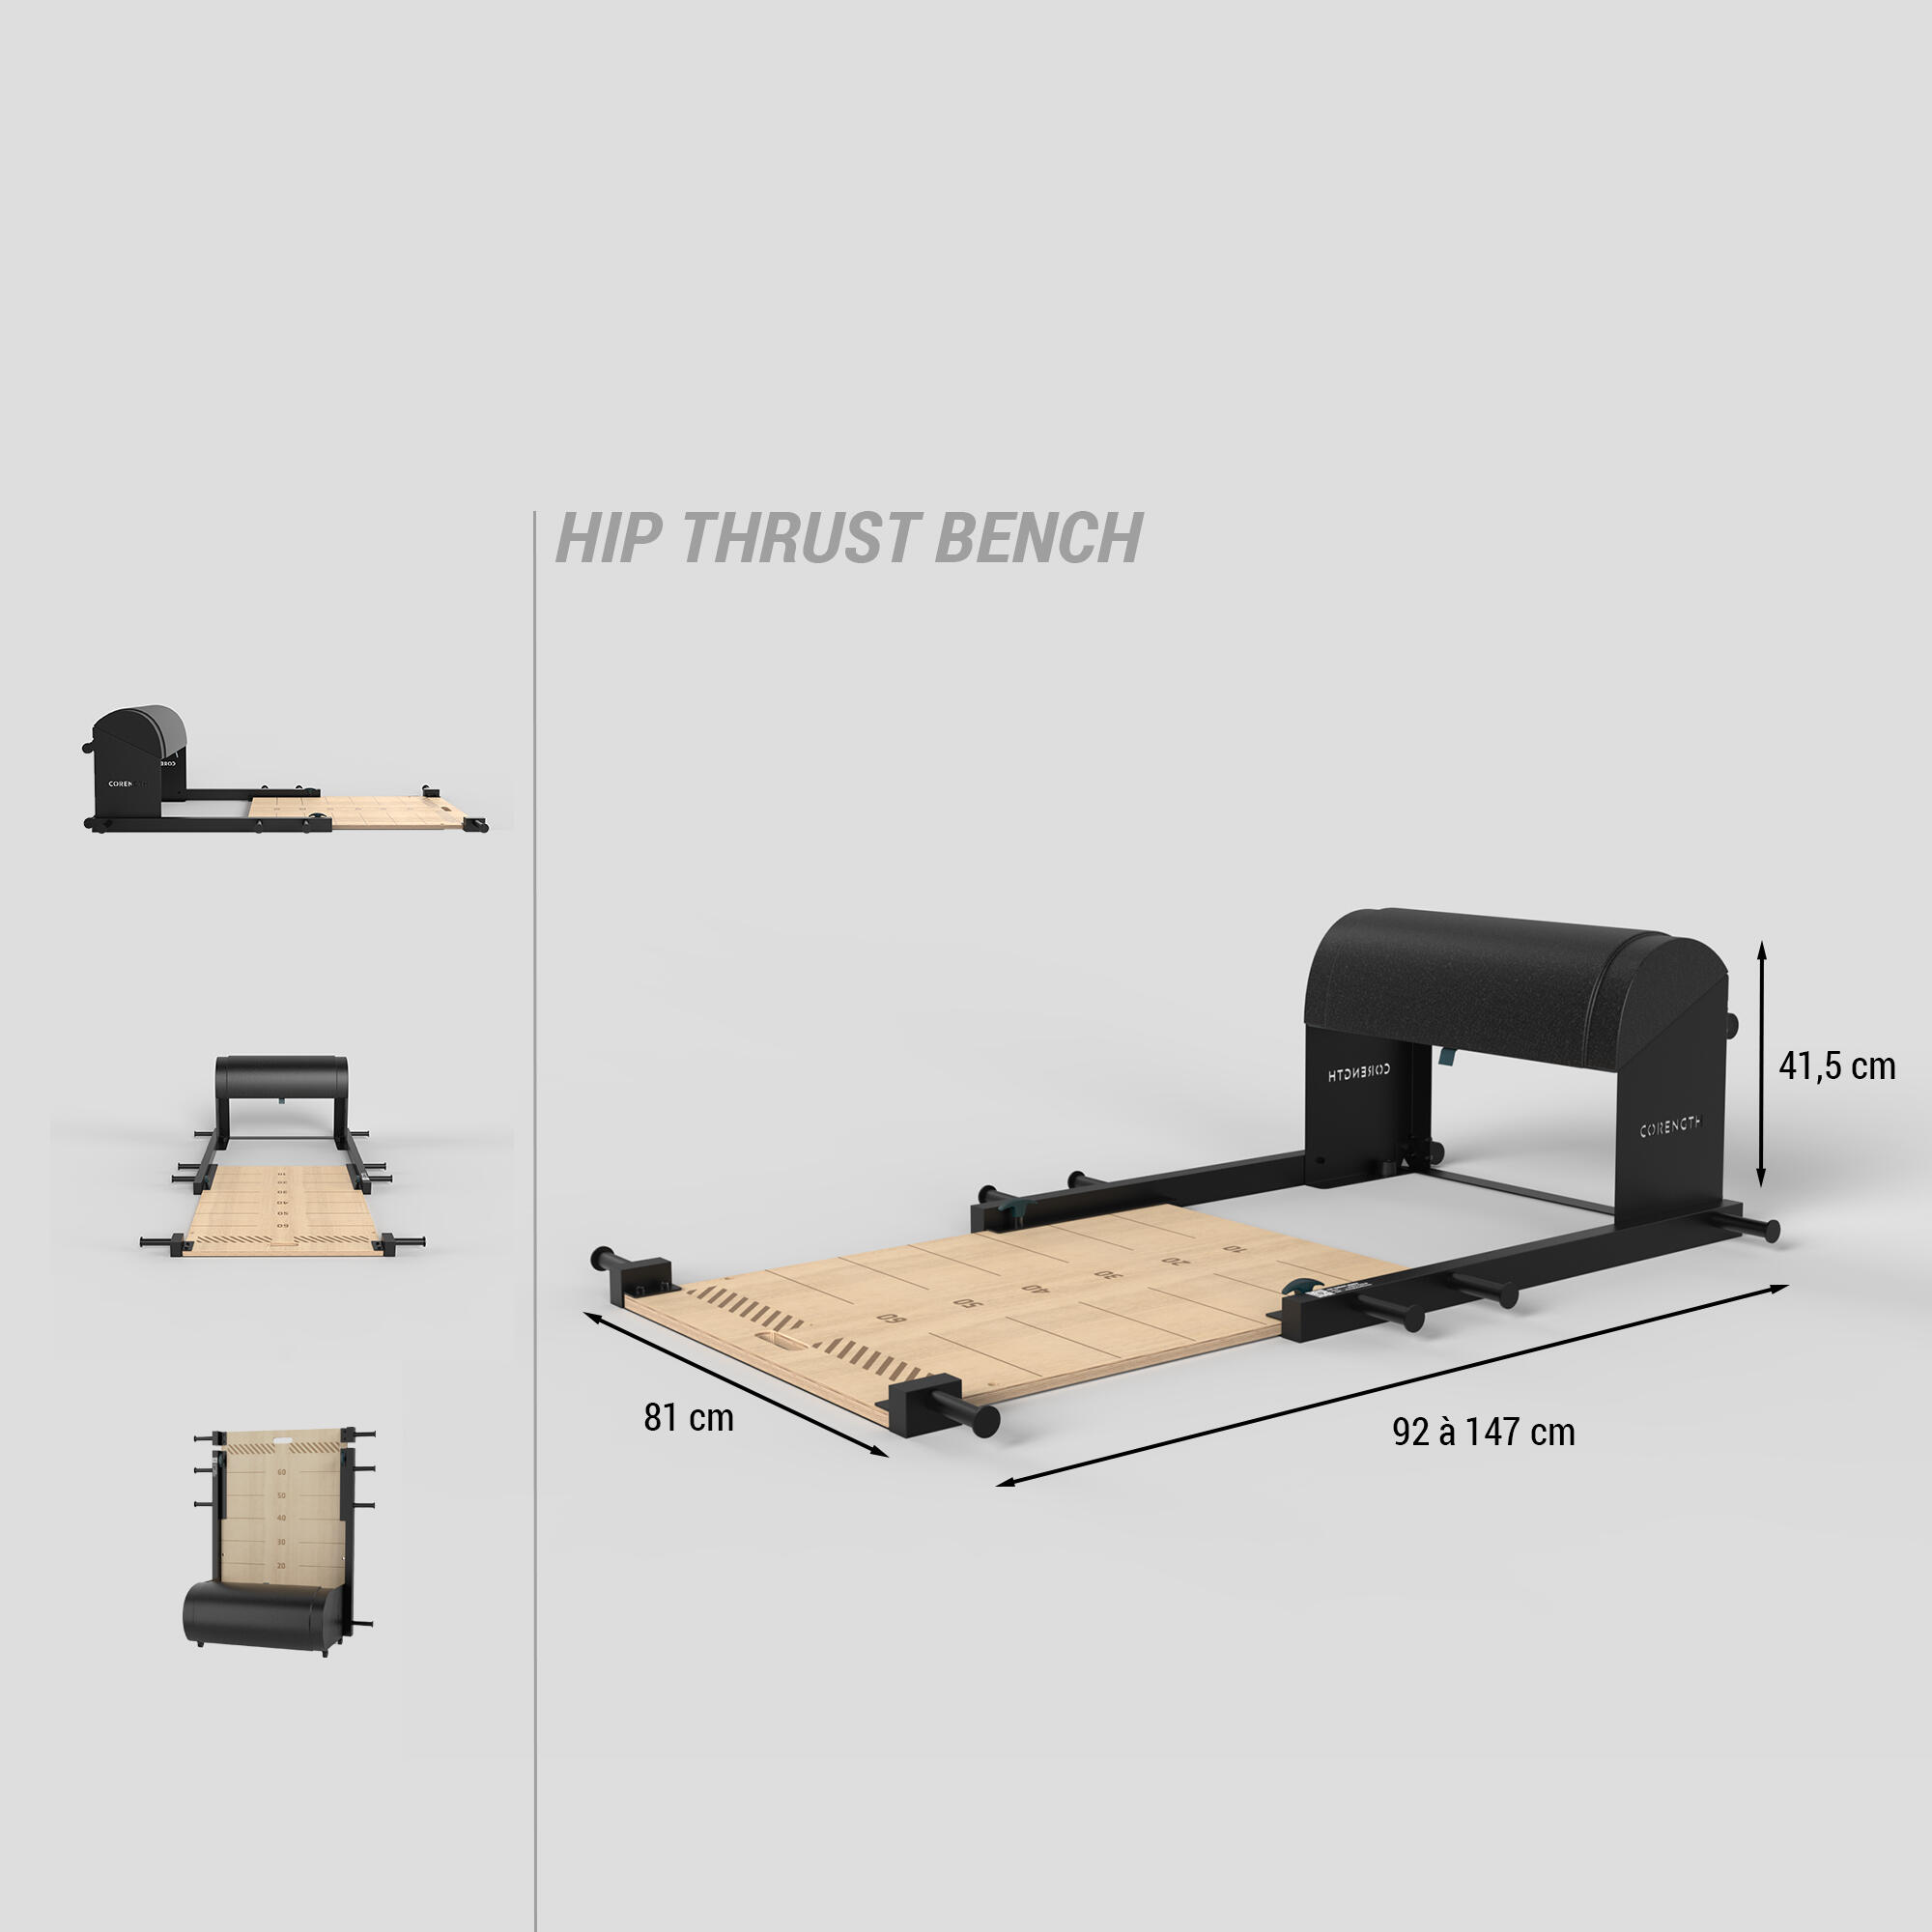 Weight Training Bench for Glutes and Lower Body - Hip Thrust Bench 4/6